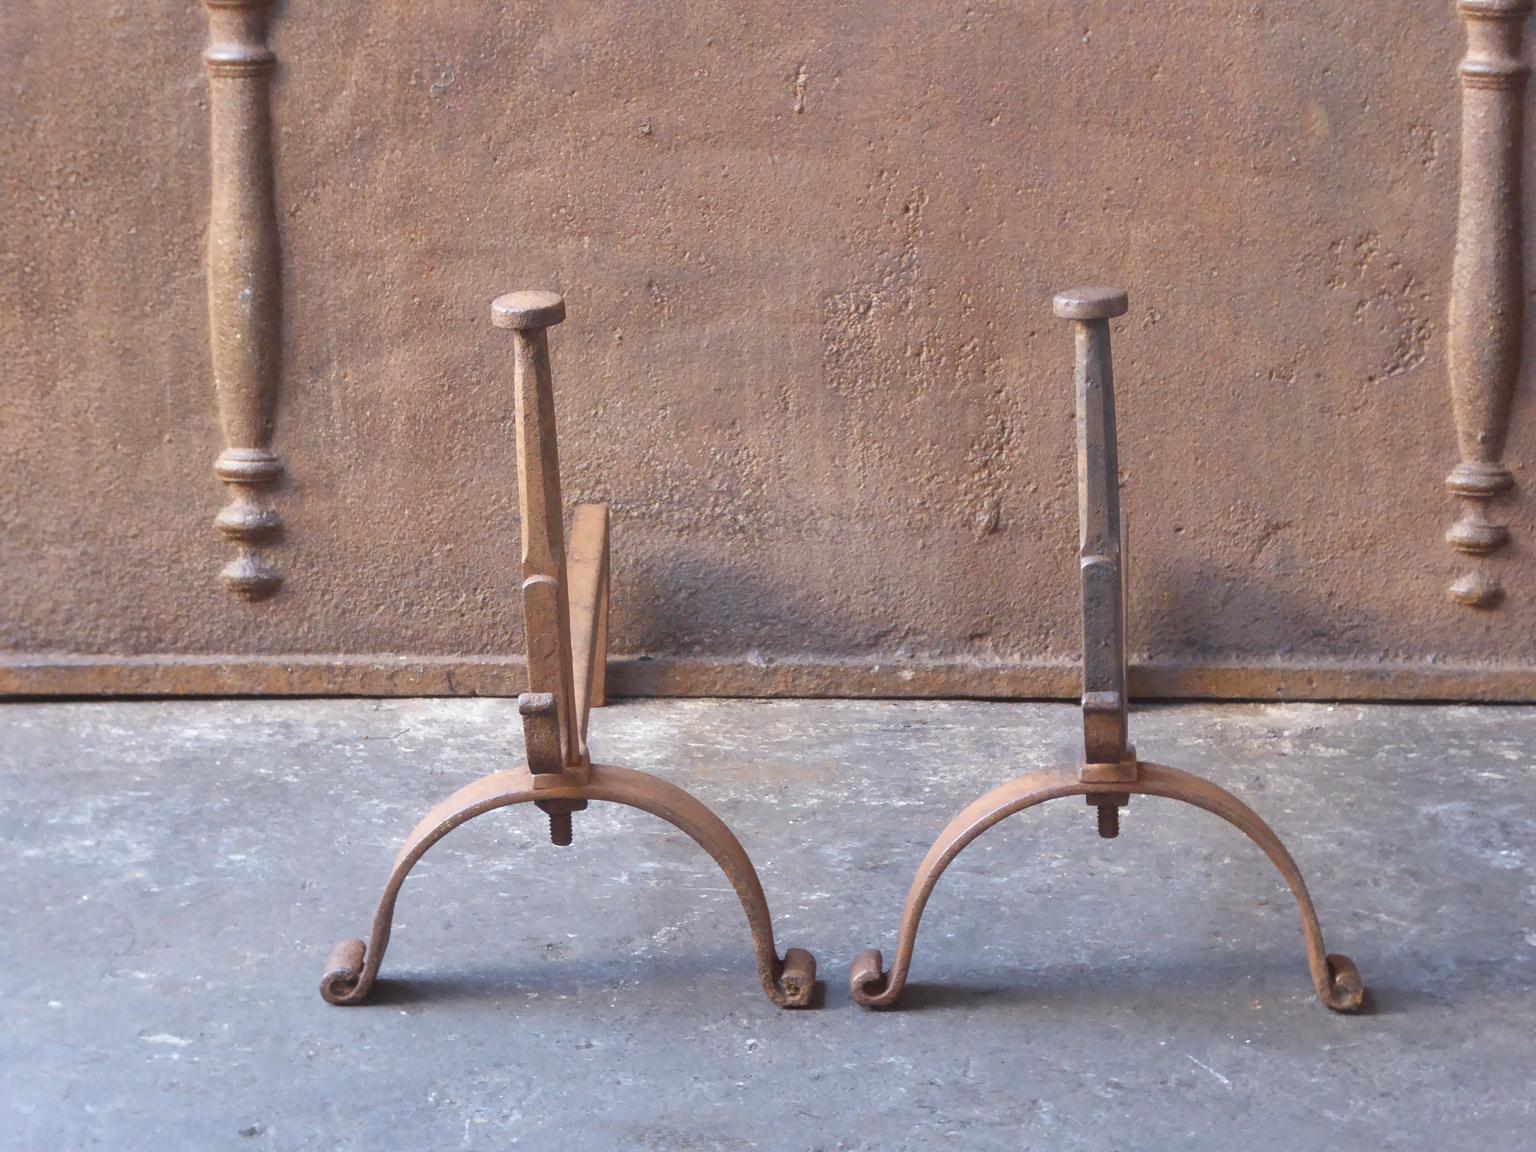 19th century French Napoleon III andirons. The andirons are made or wrought iron and have spit hooks to grill food.







 